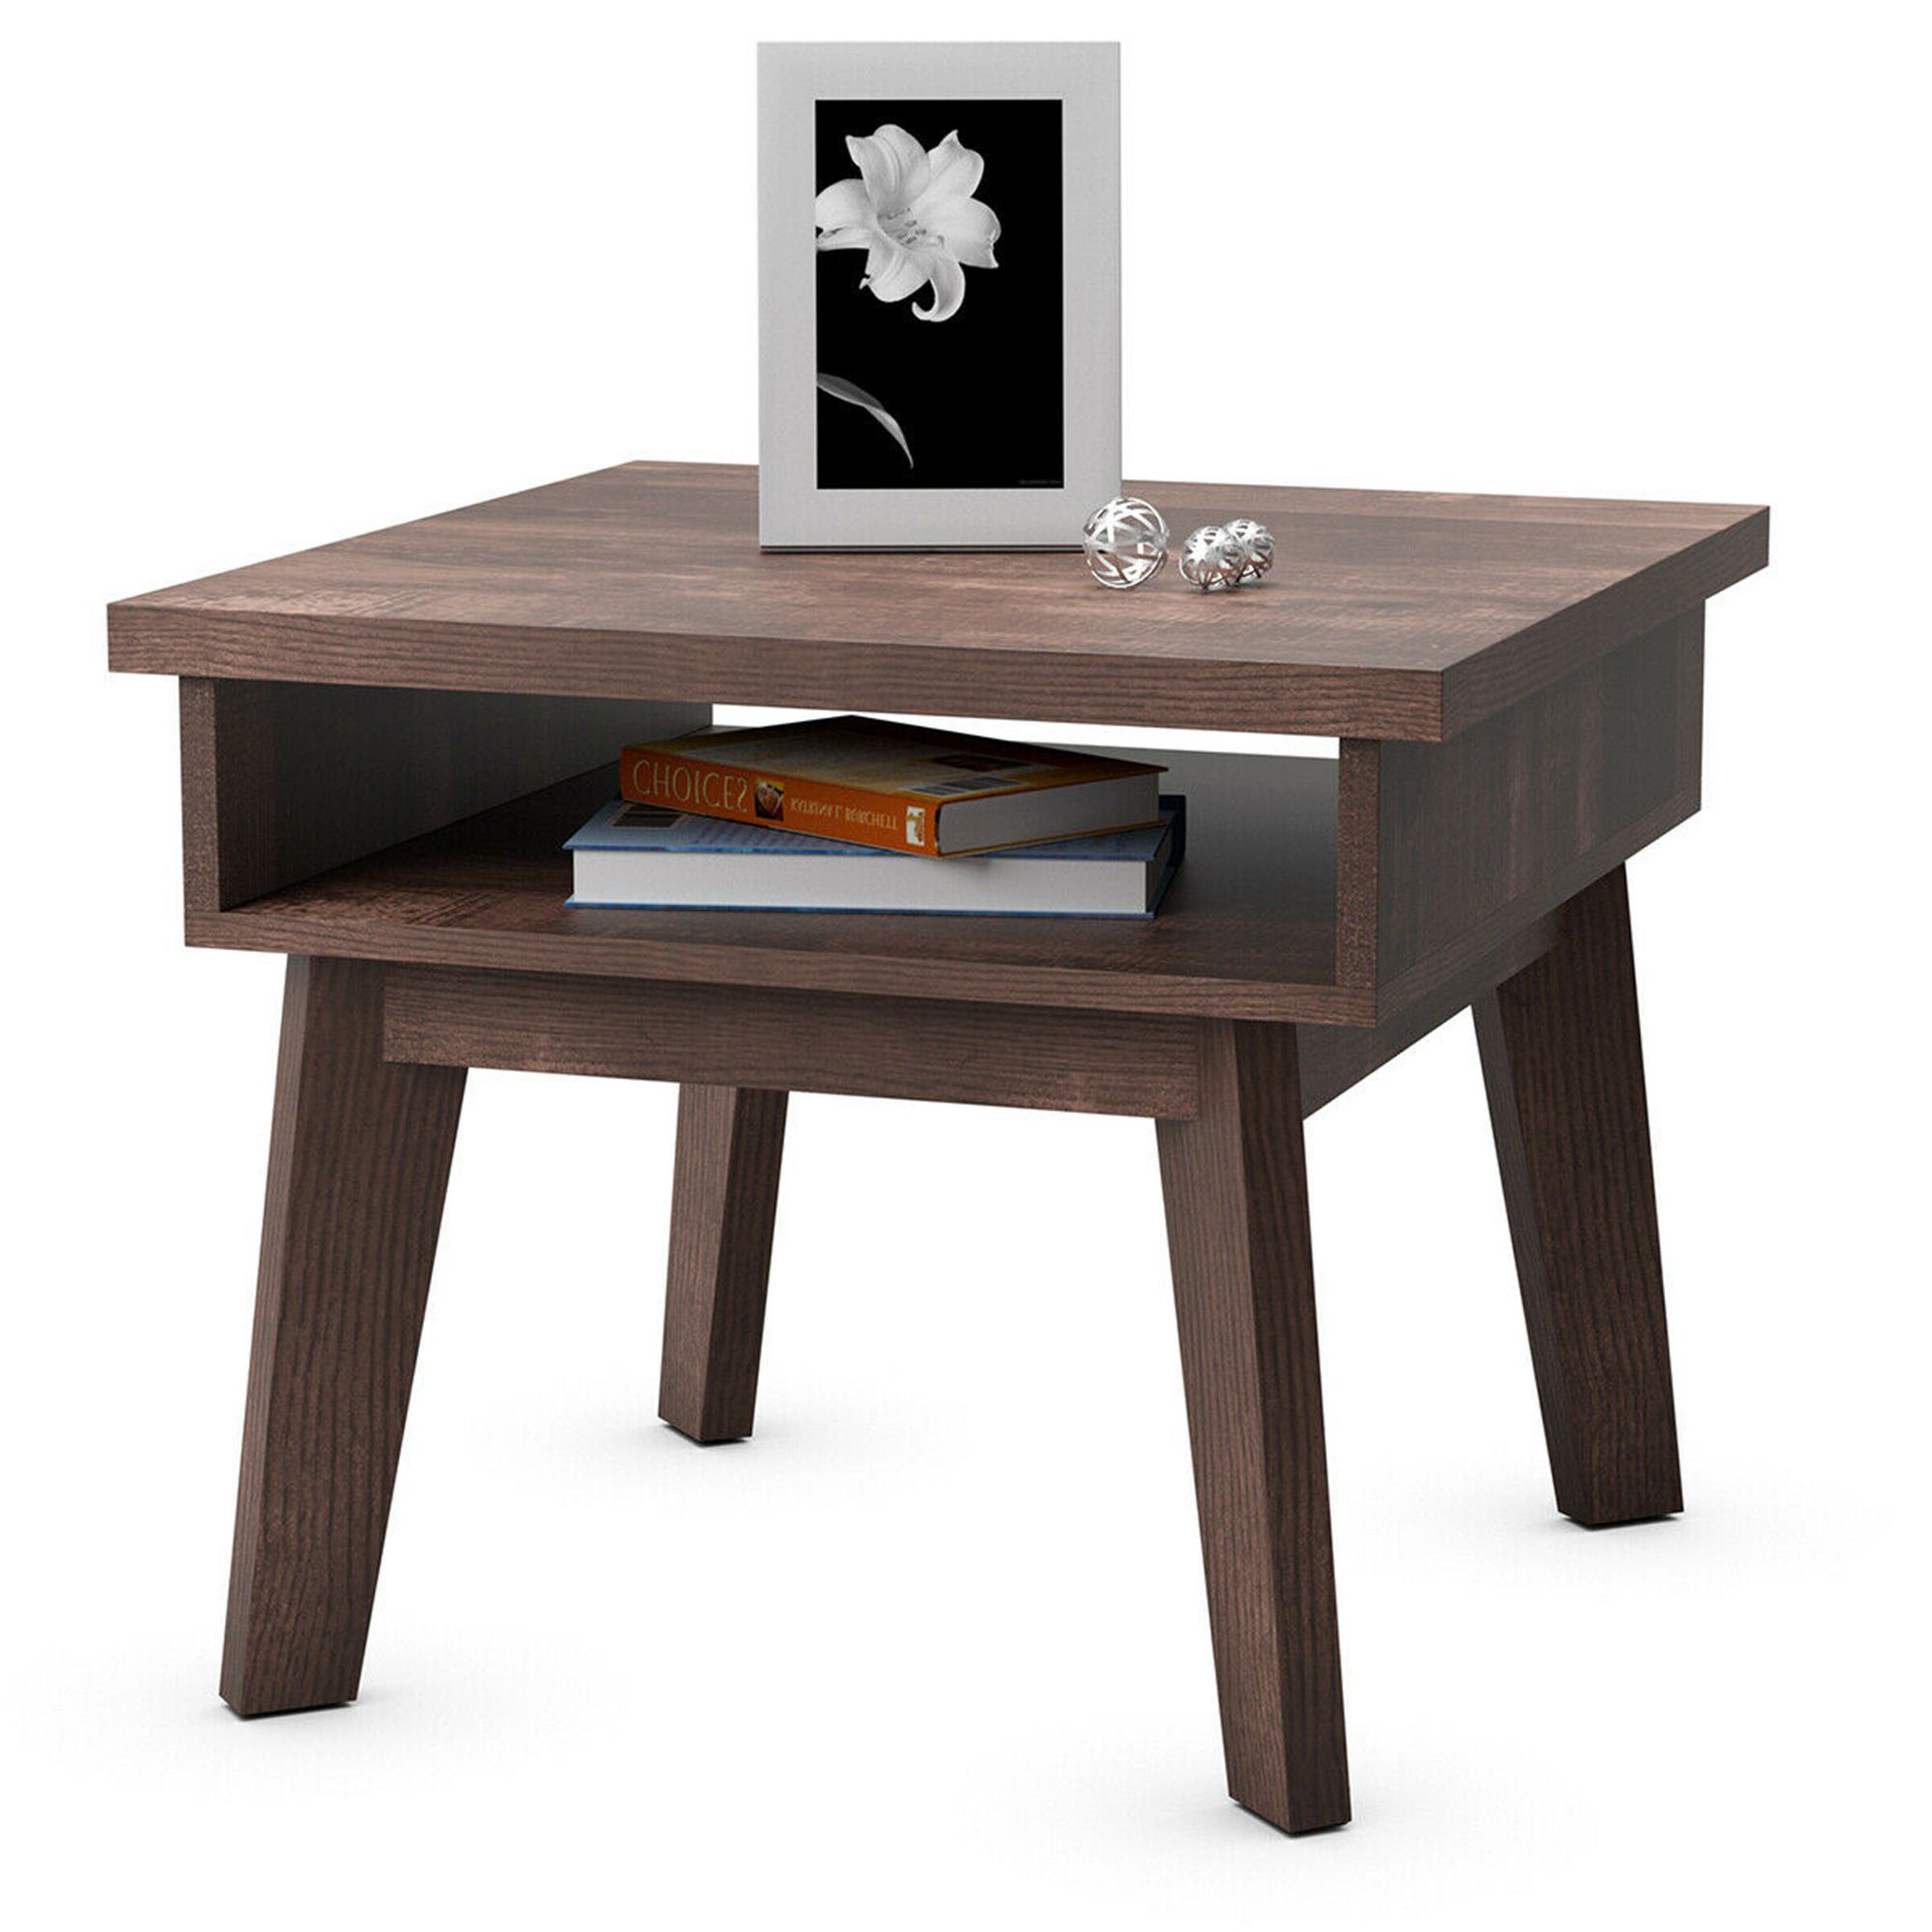 Gymax 2 Tier Nightstand Space Saving Side Sofa End Table W Inside Famous Open Storage Coffee Tables (View 6 of 20)